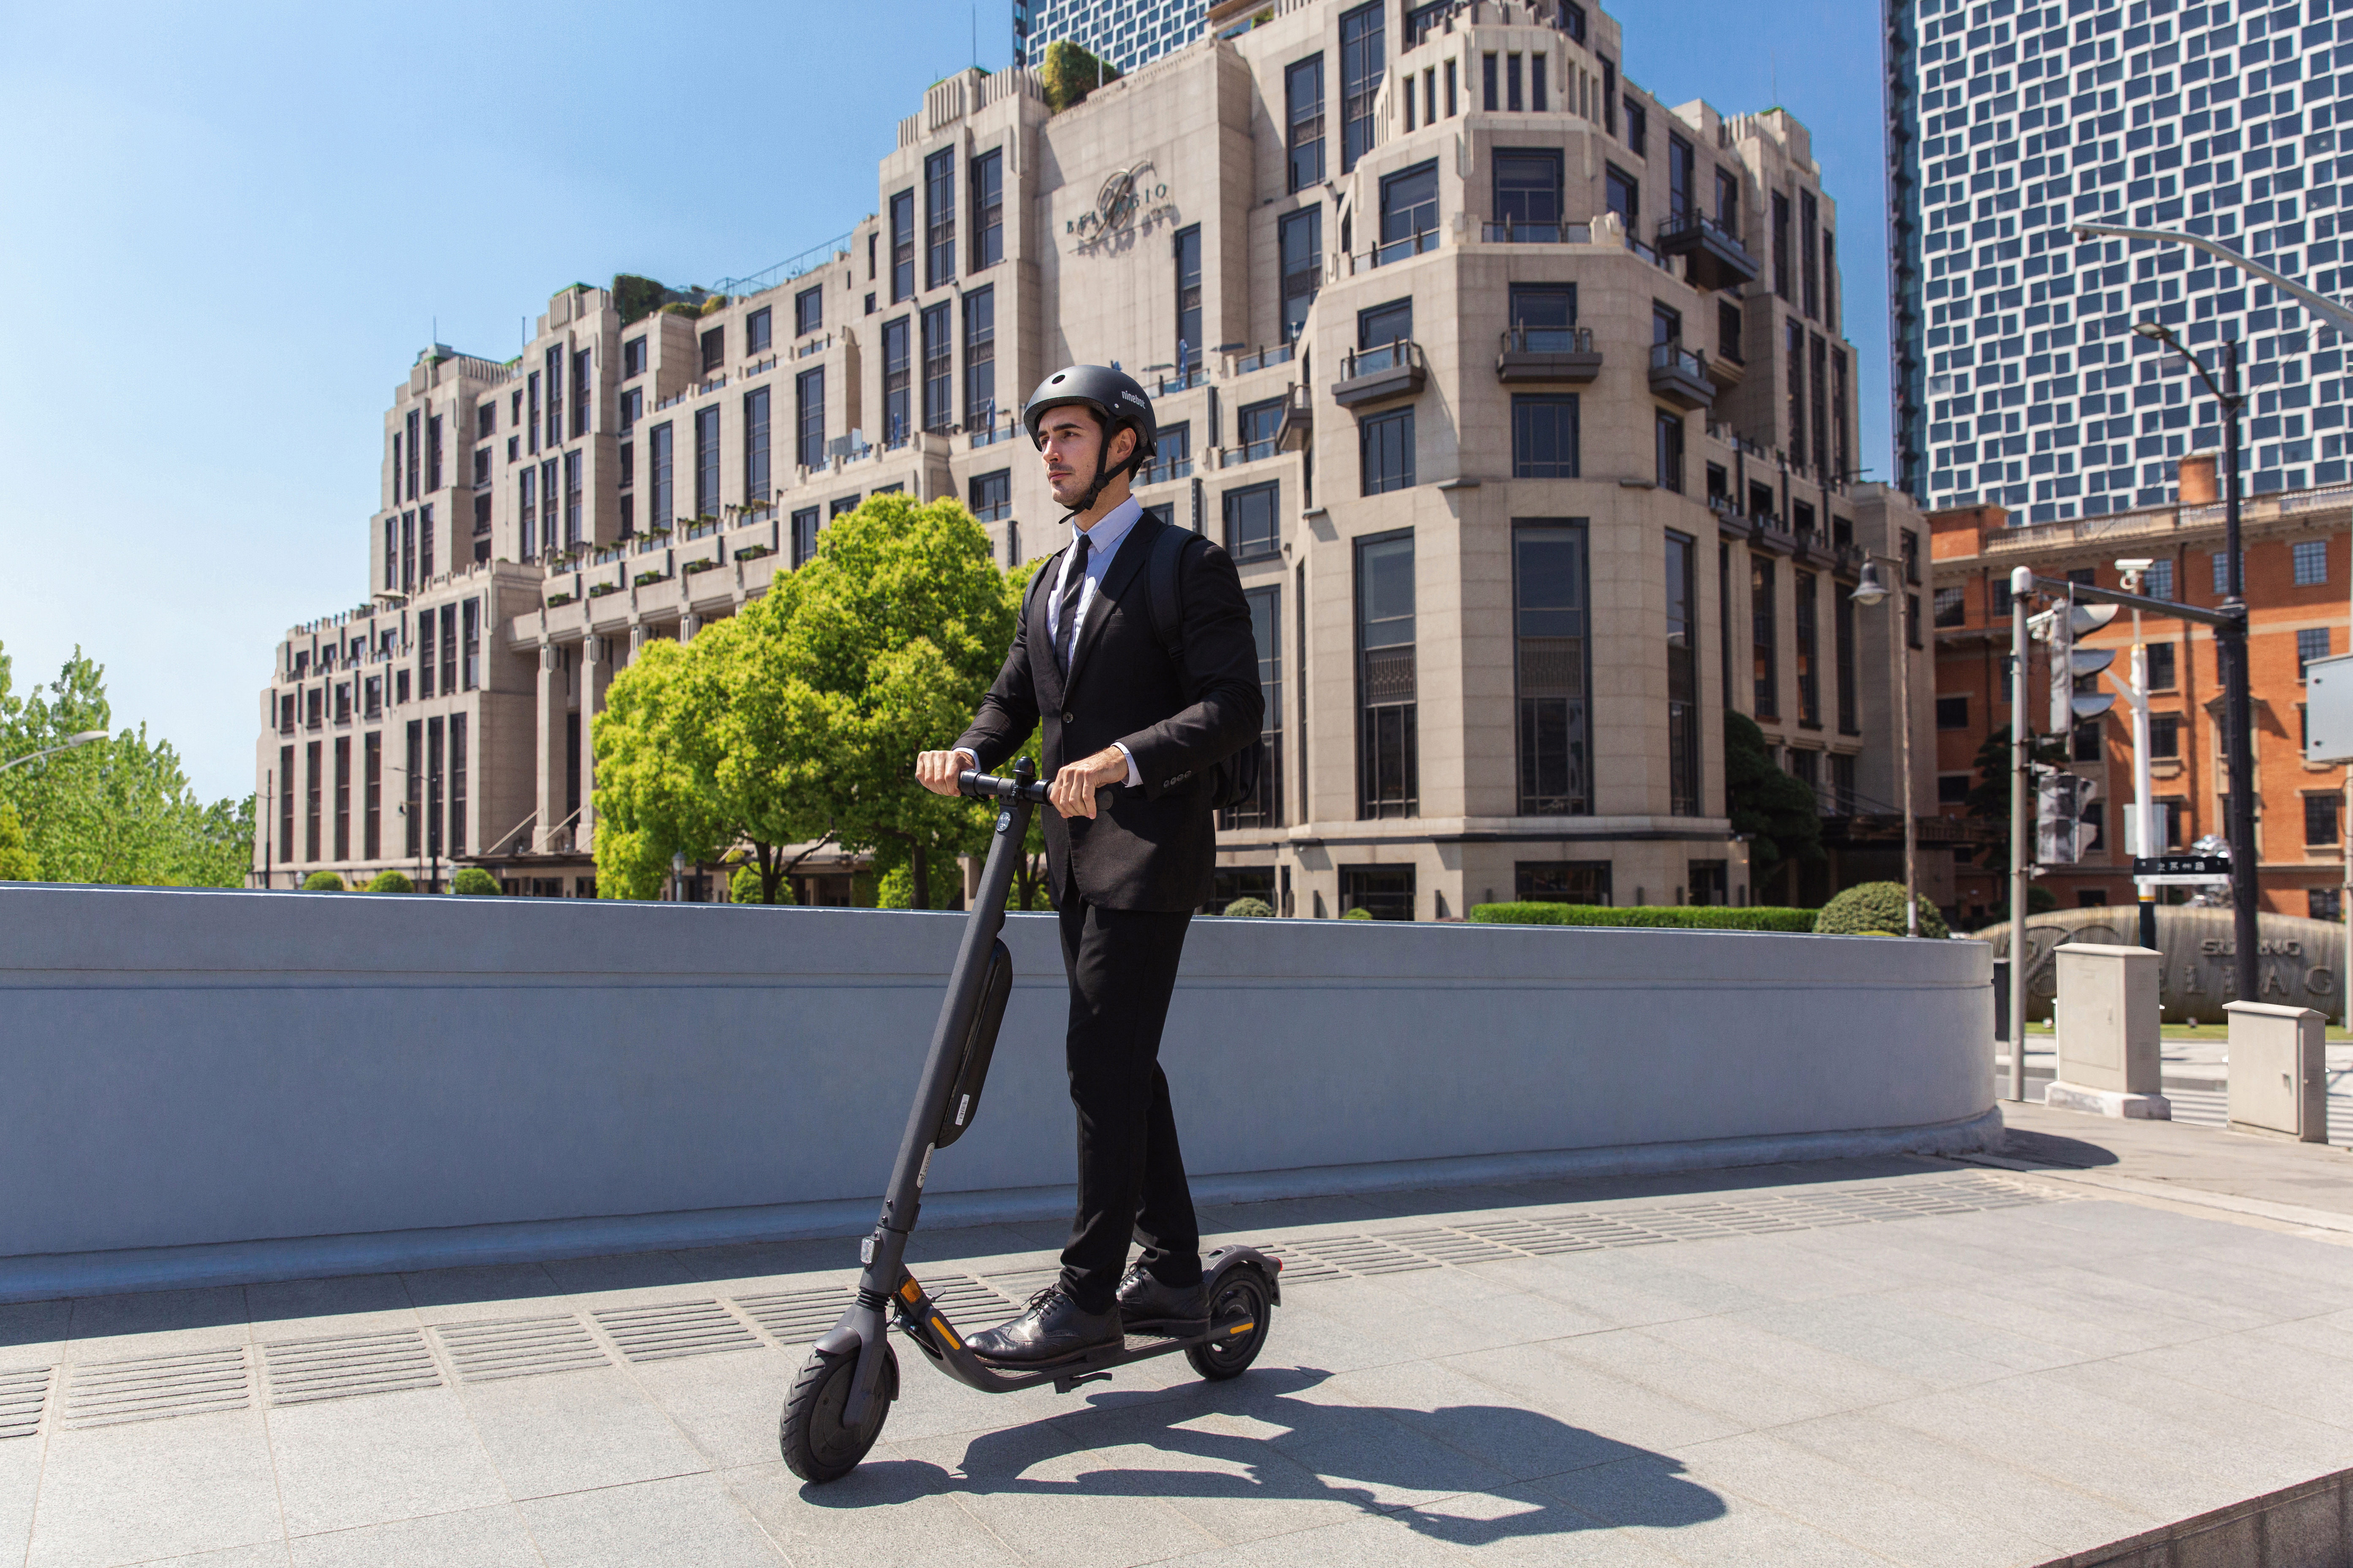 Segway Ninebot E25a Electric Kick Scooter Electric, Upgraded Motor Power, 9-inch Dual Density Tires, Lightweight and Foldable - image 3 of 18